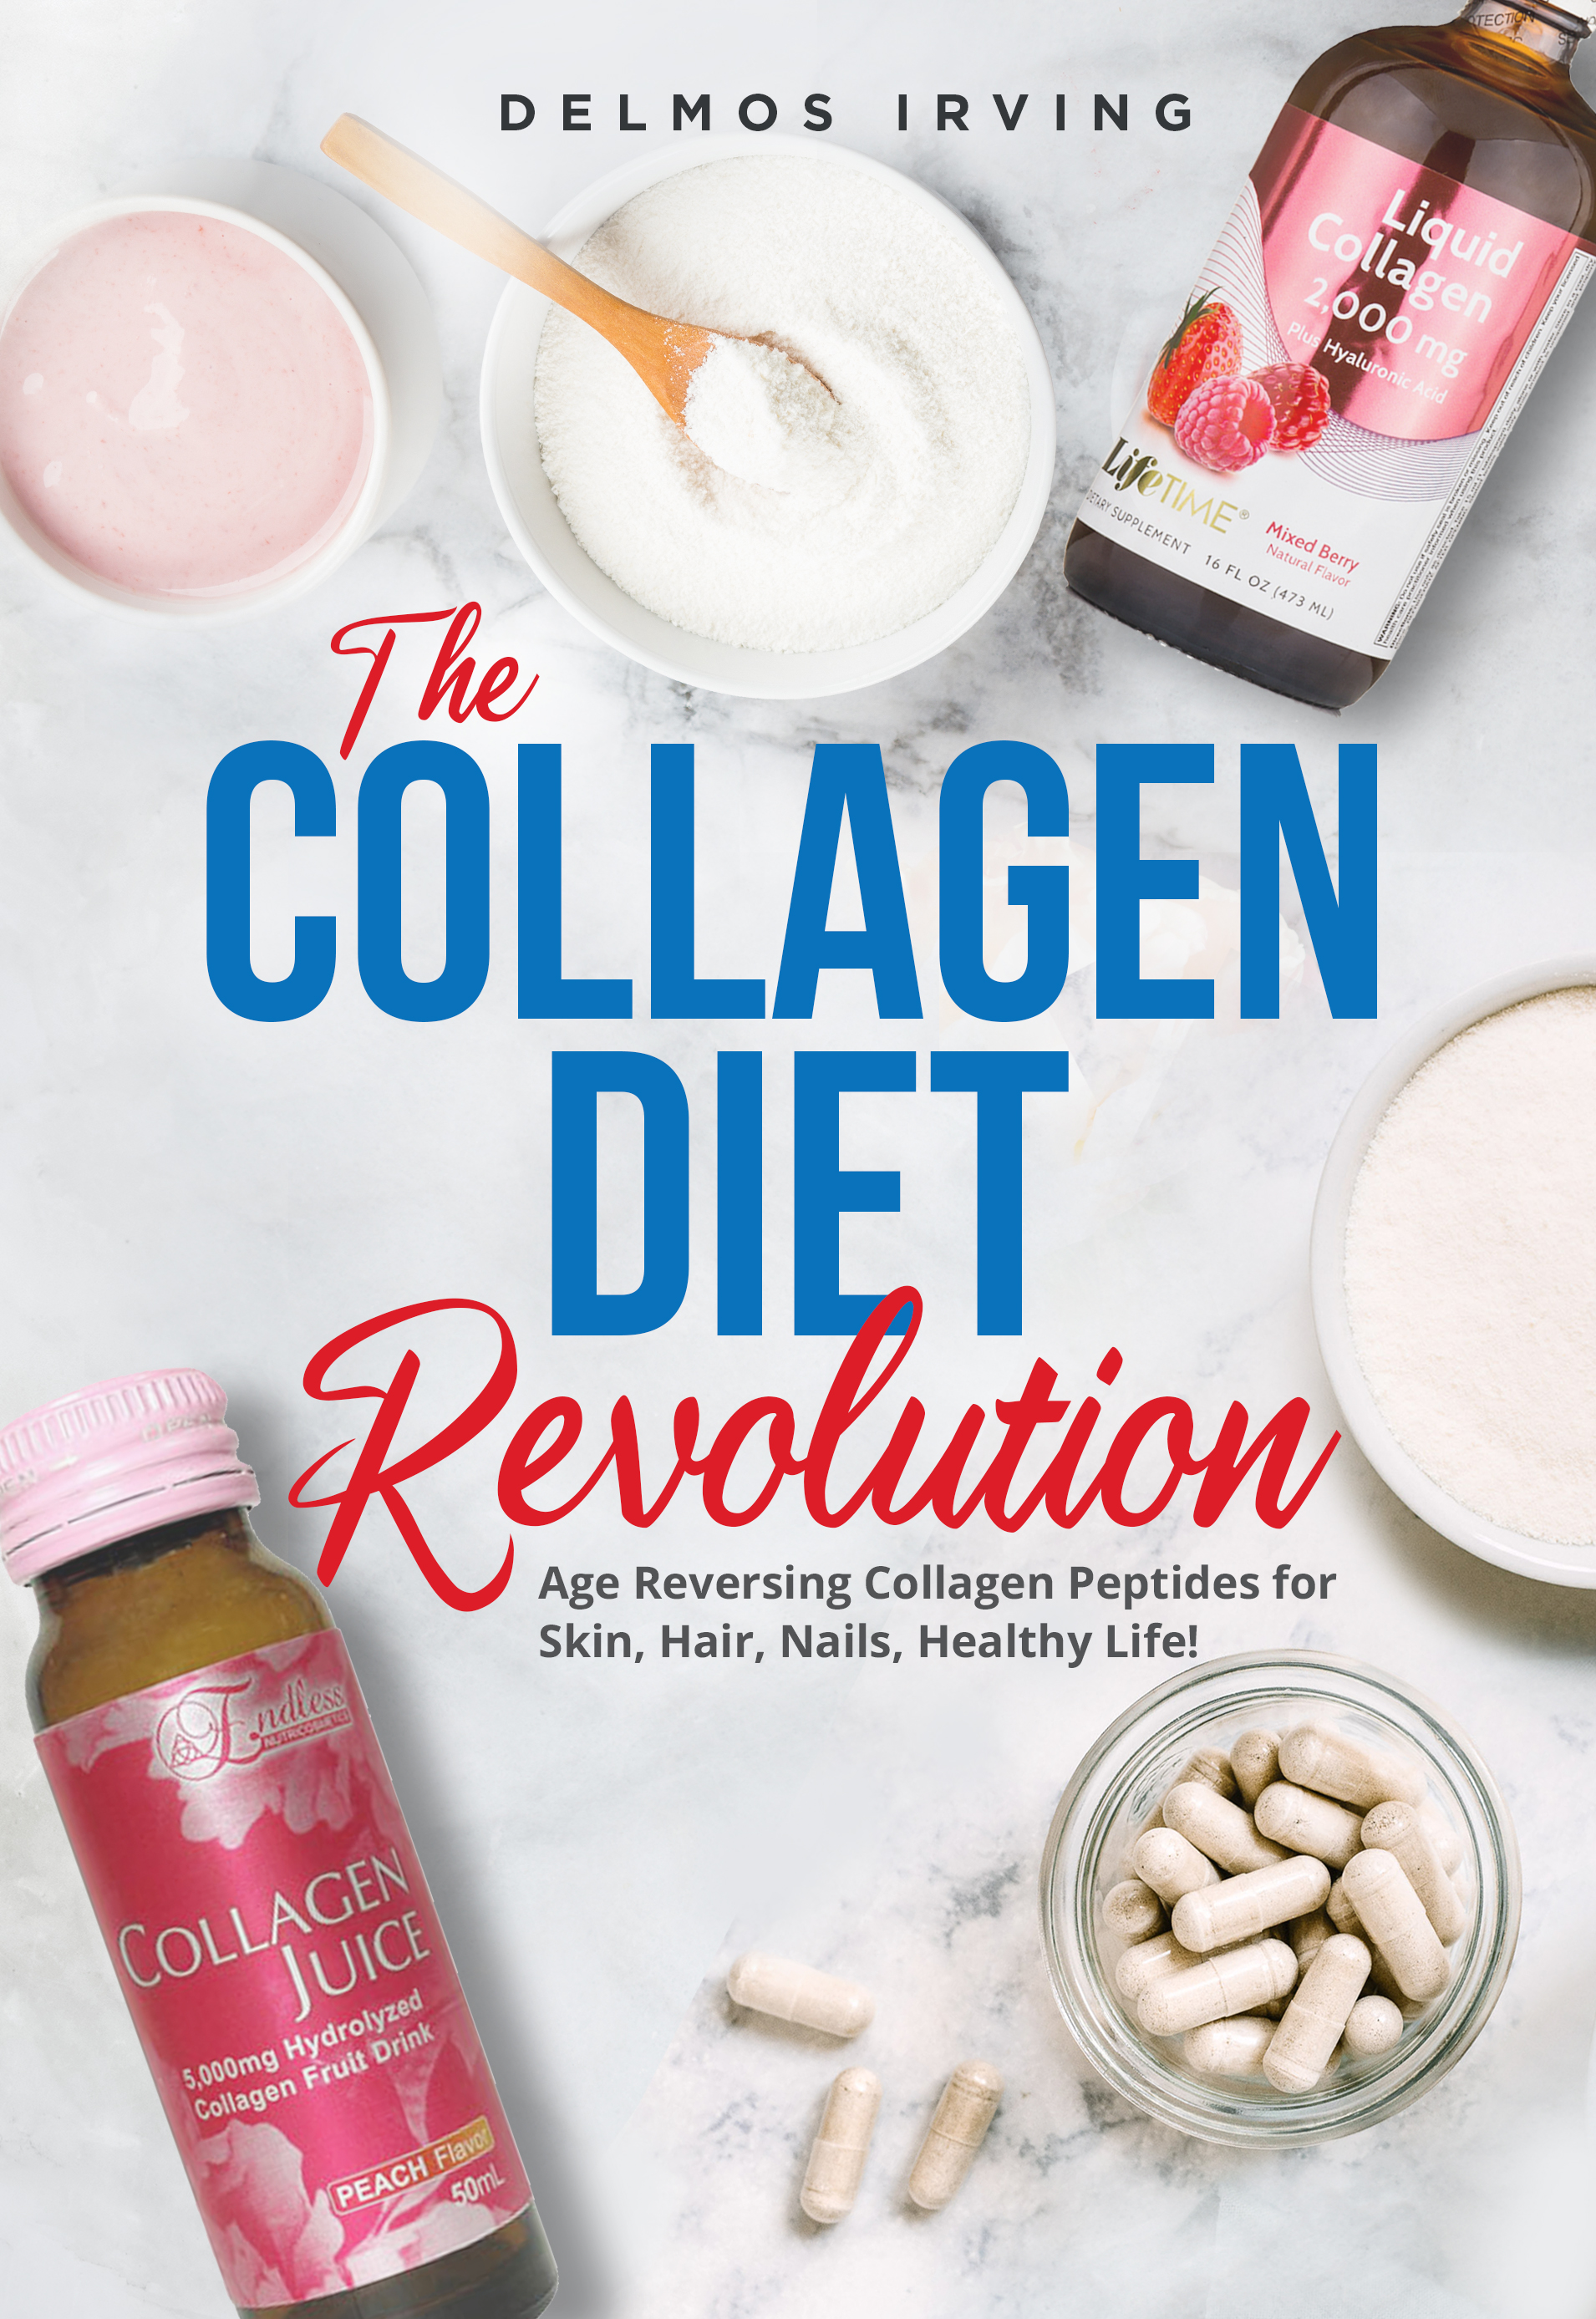 Delmos Irving is Back with a New Book, "The Collagen Diet Revolution", Revealing an Authentic Fountain of Youth